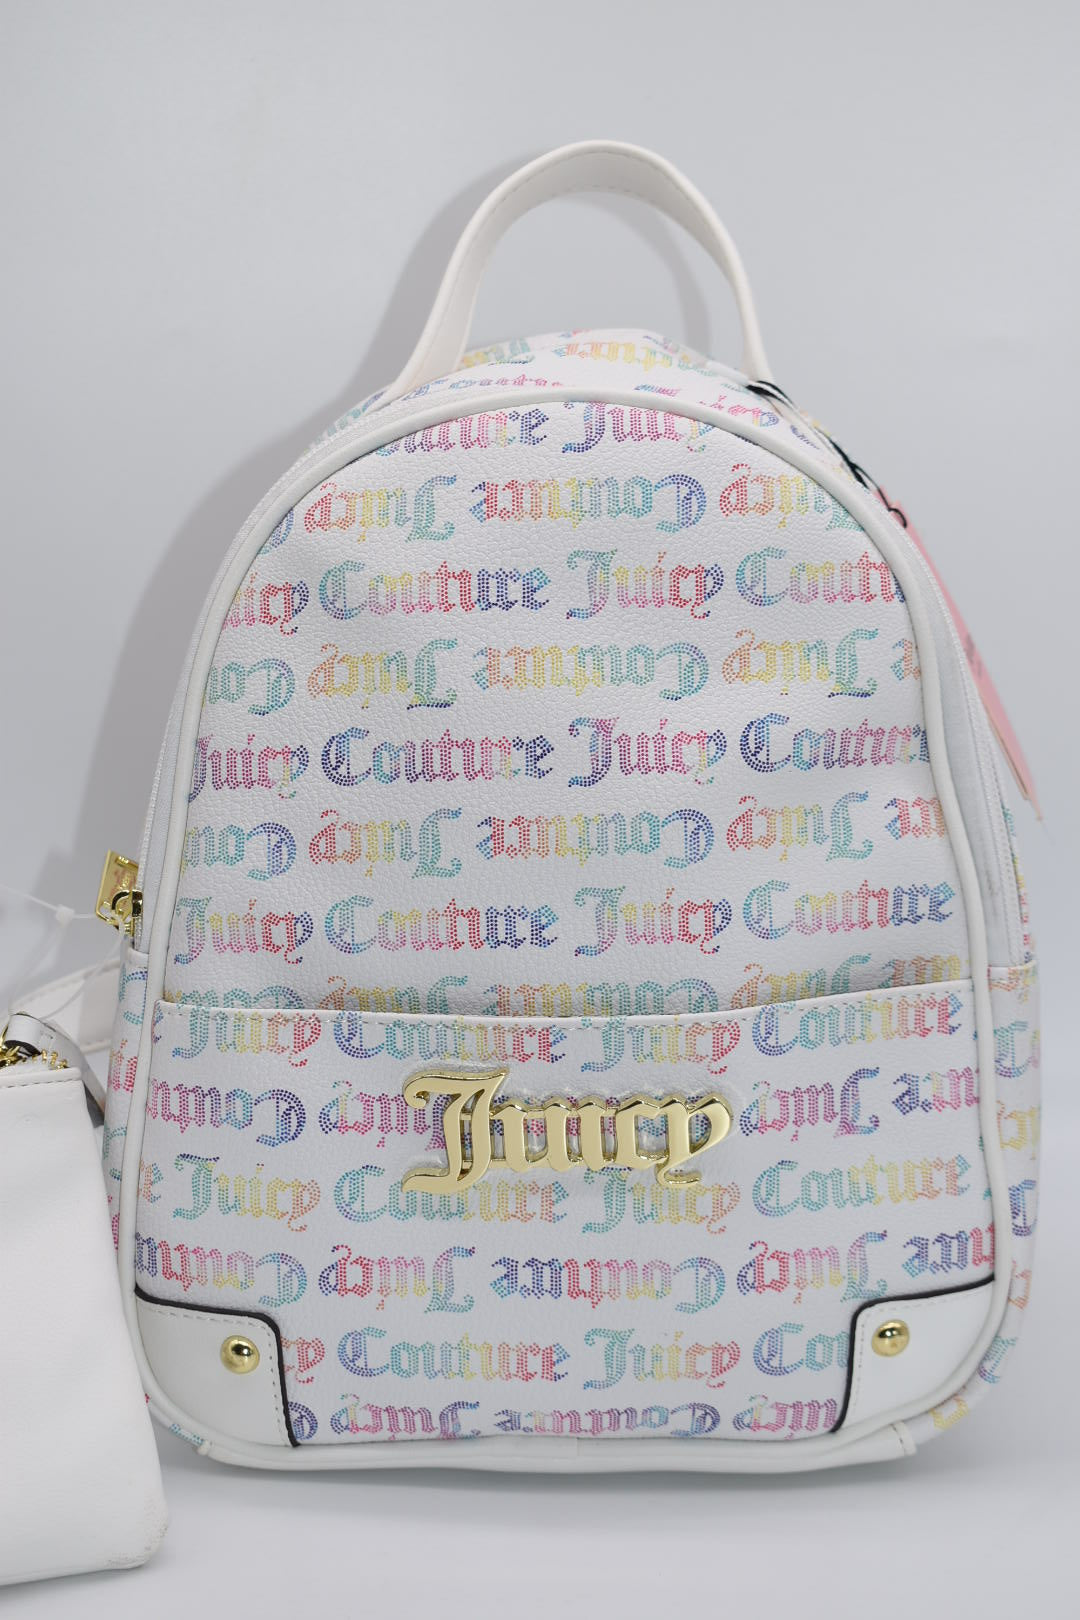 Juicy Couture Pullout Pouch Backpack in Multi White